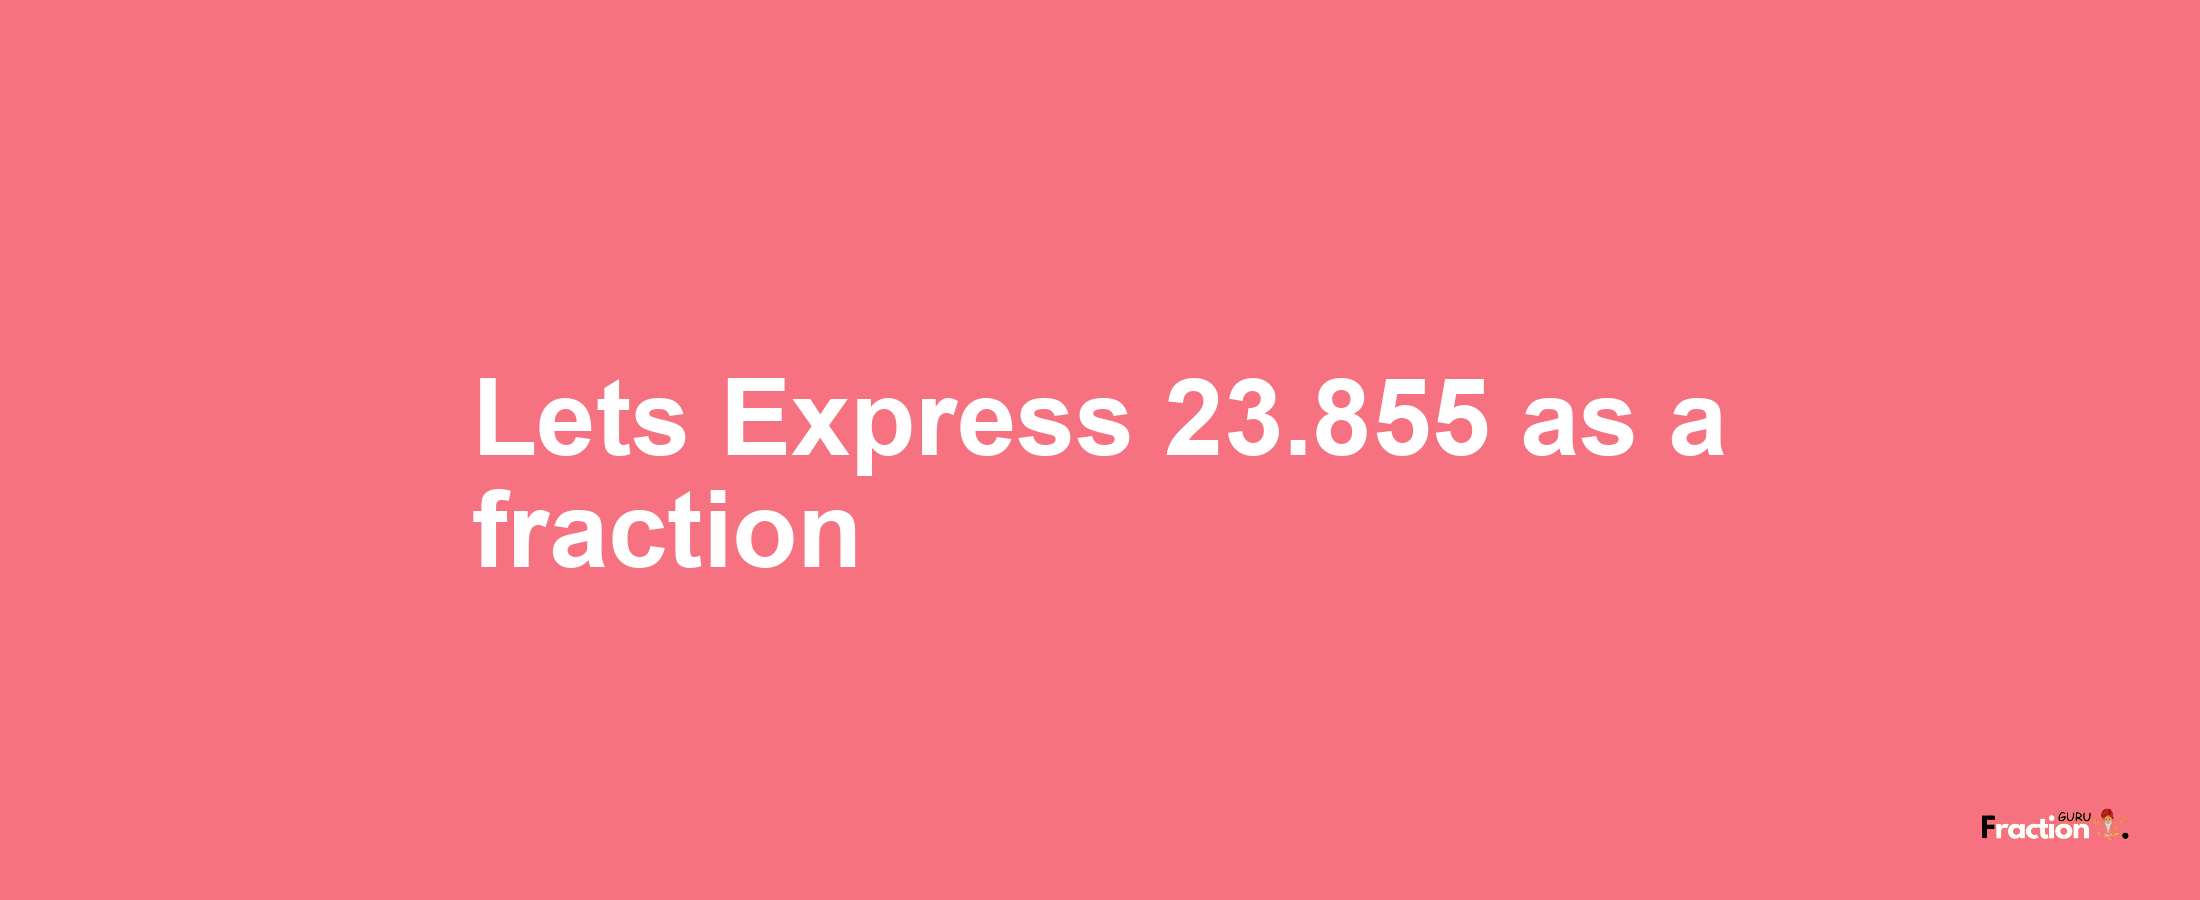 Lets Express 23.855 as afraction